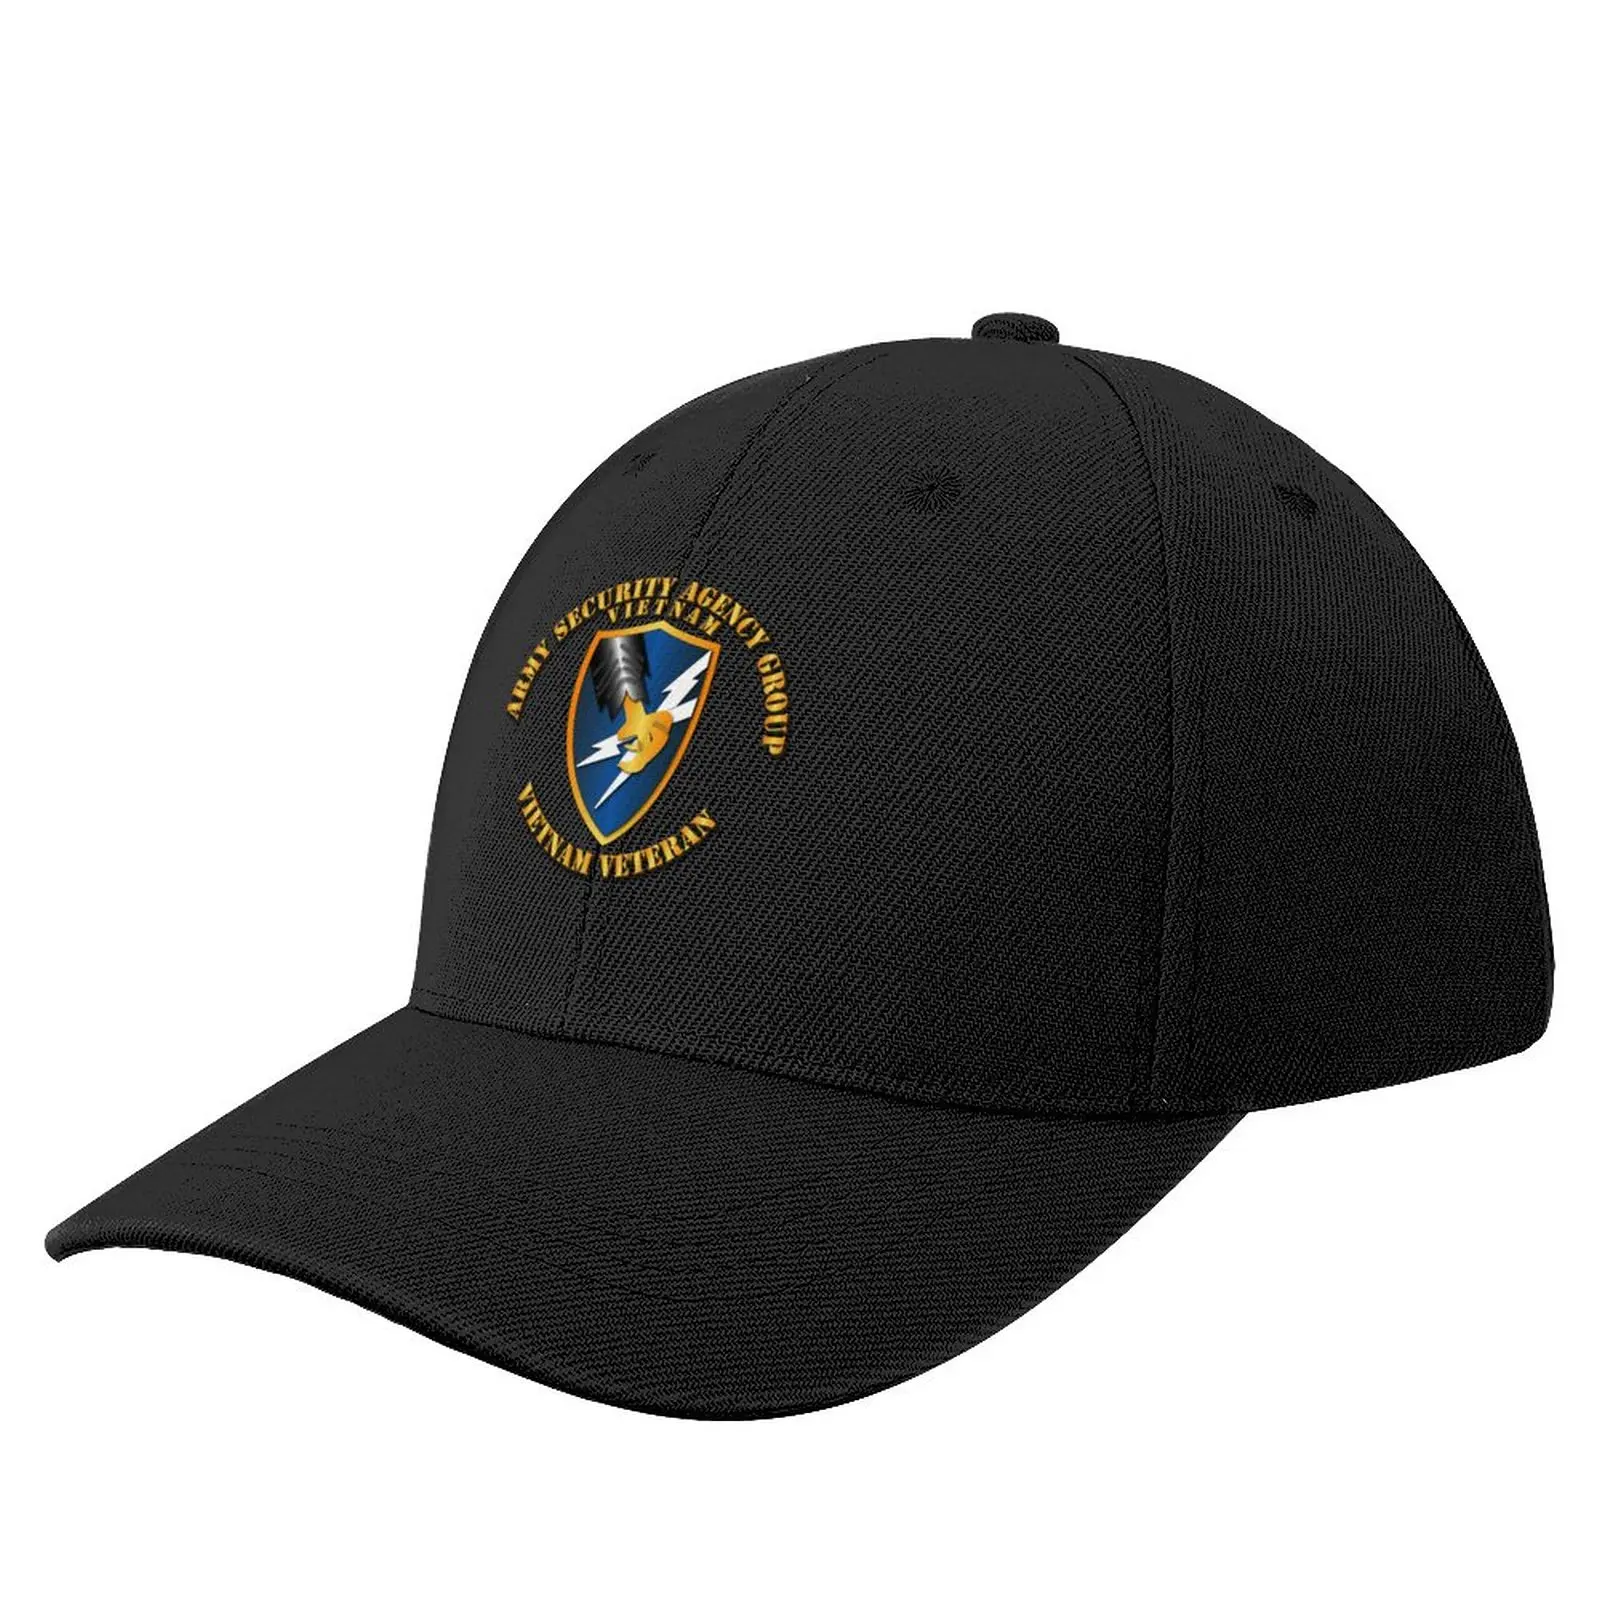 

Army -Army Security Agency Group VN Vet w Txt Baseball Cap summer hats funny hat Rave Horse Hat Hat Women Men's